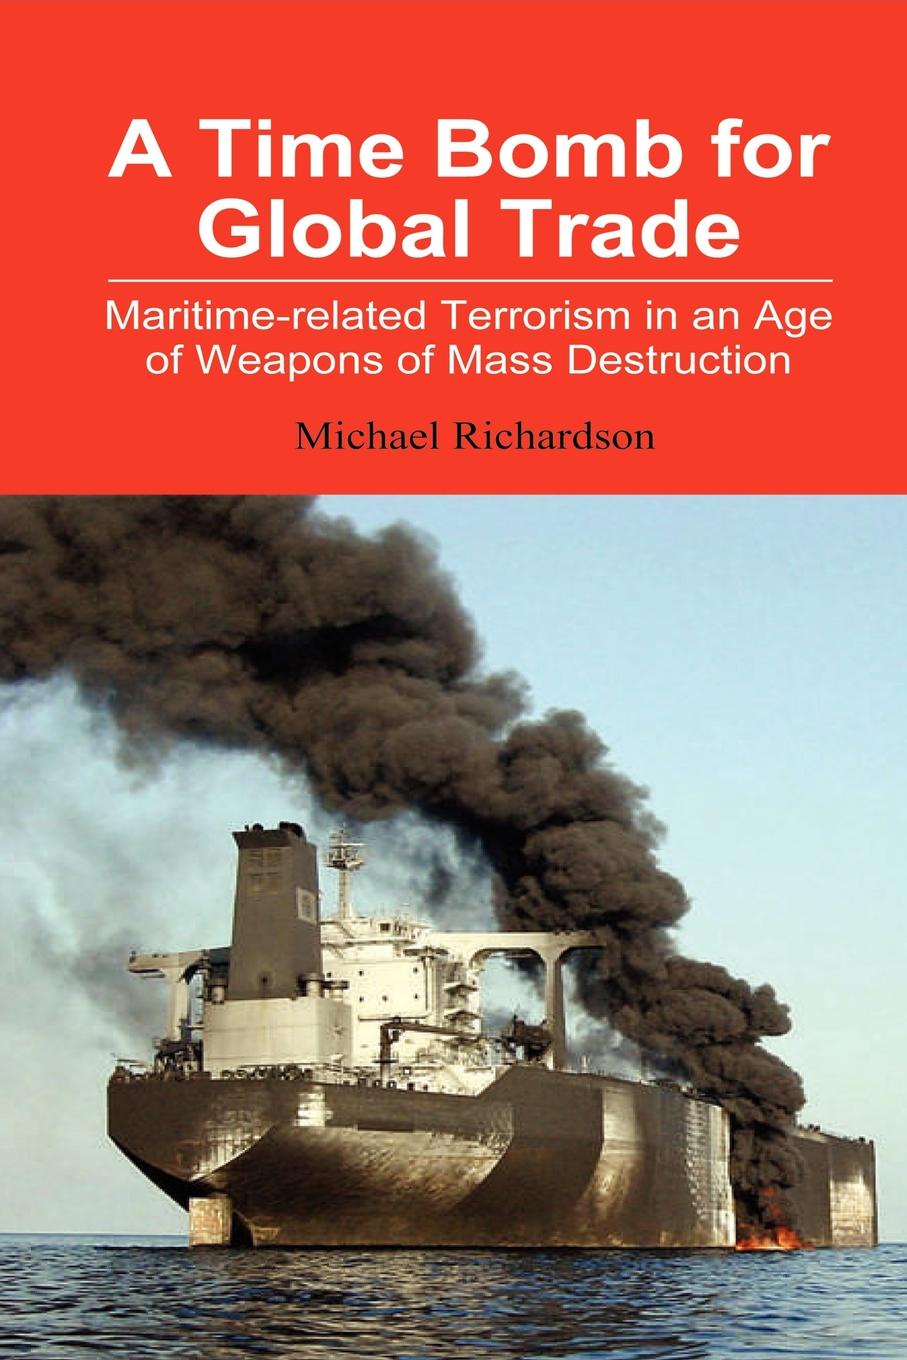 A Time Bomb for Global Trade. Maritime-Related Terrorism in an Age of Weapons of Mass Destruction